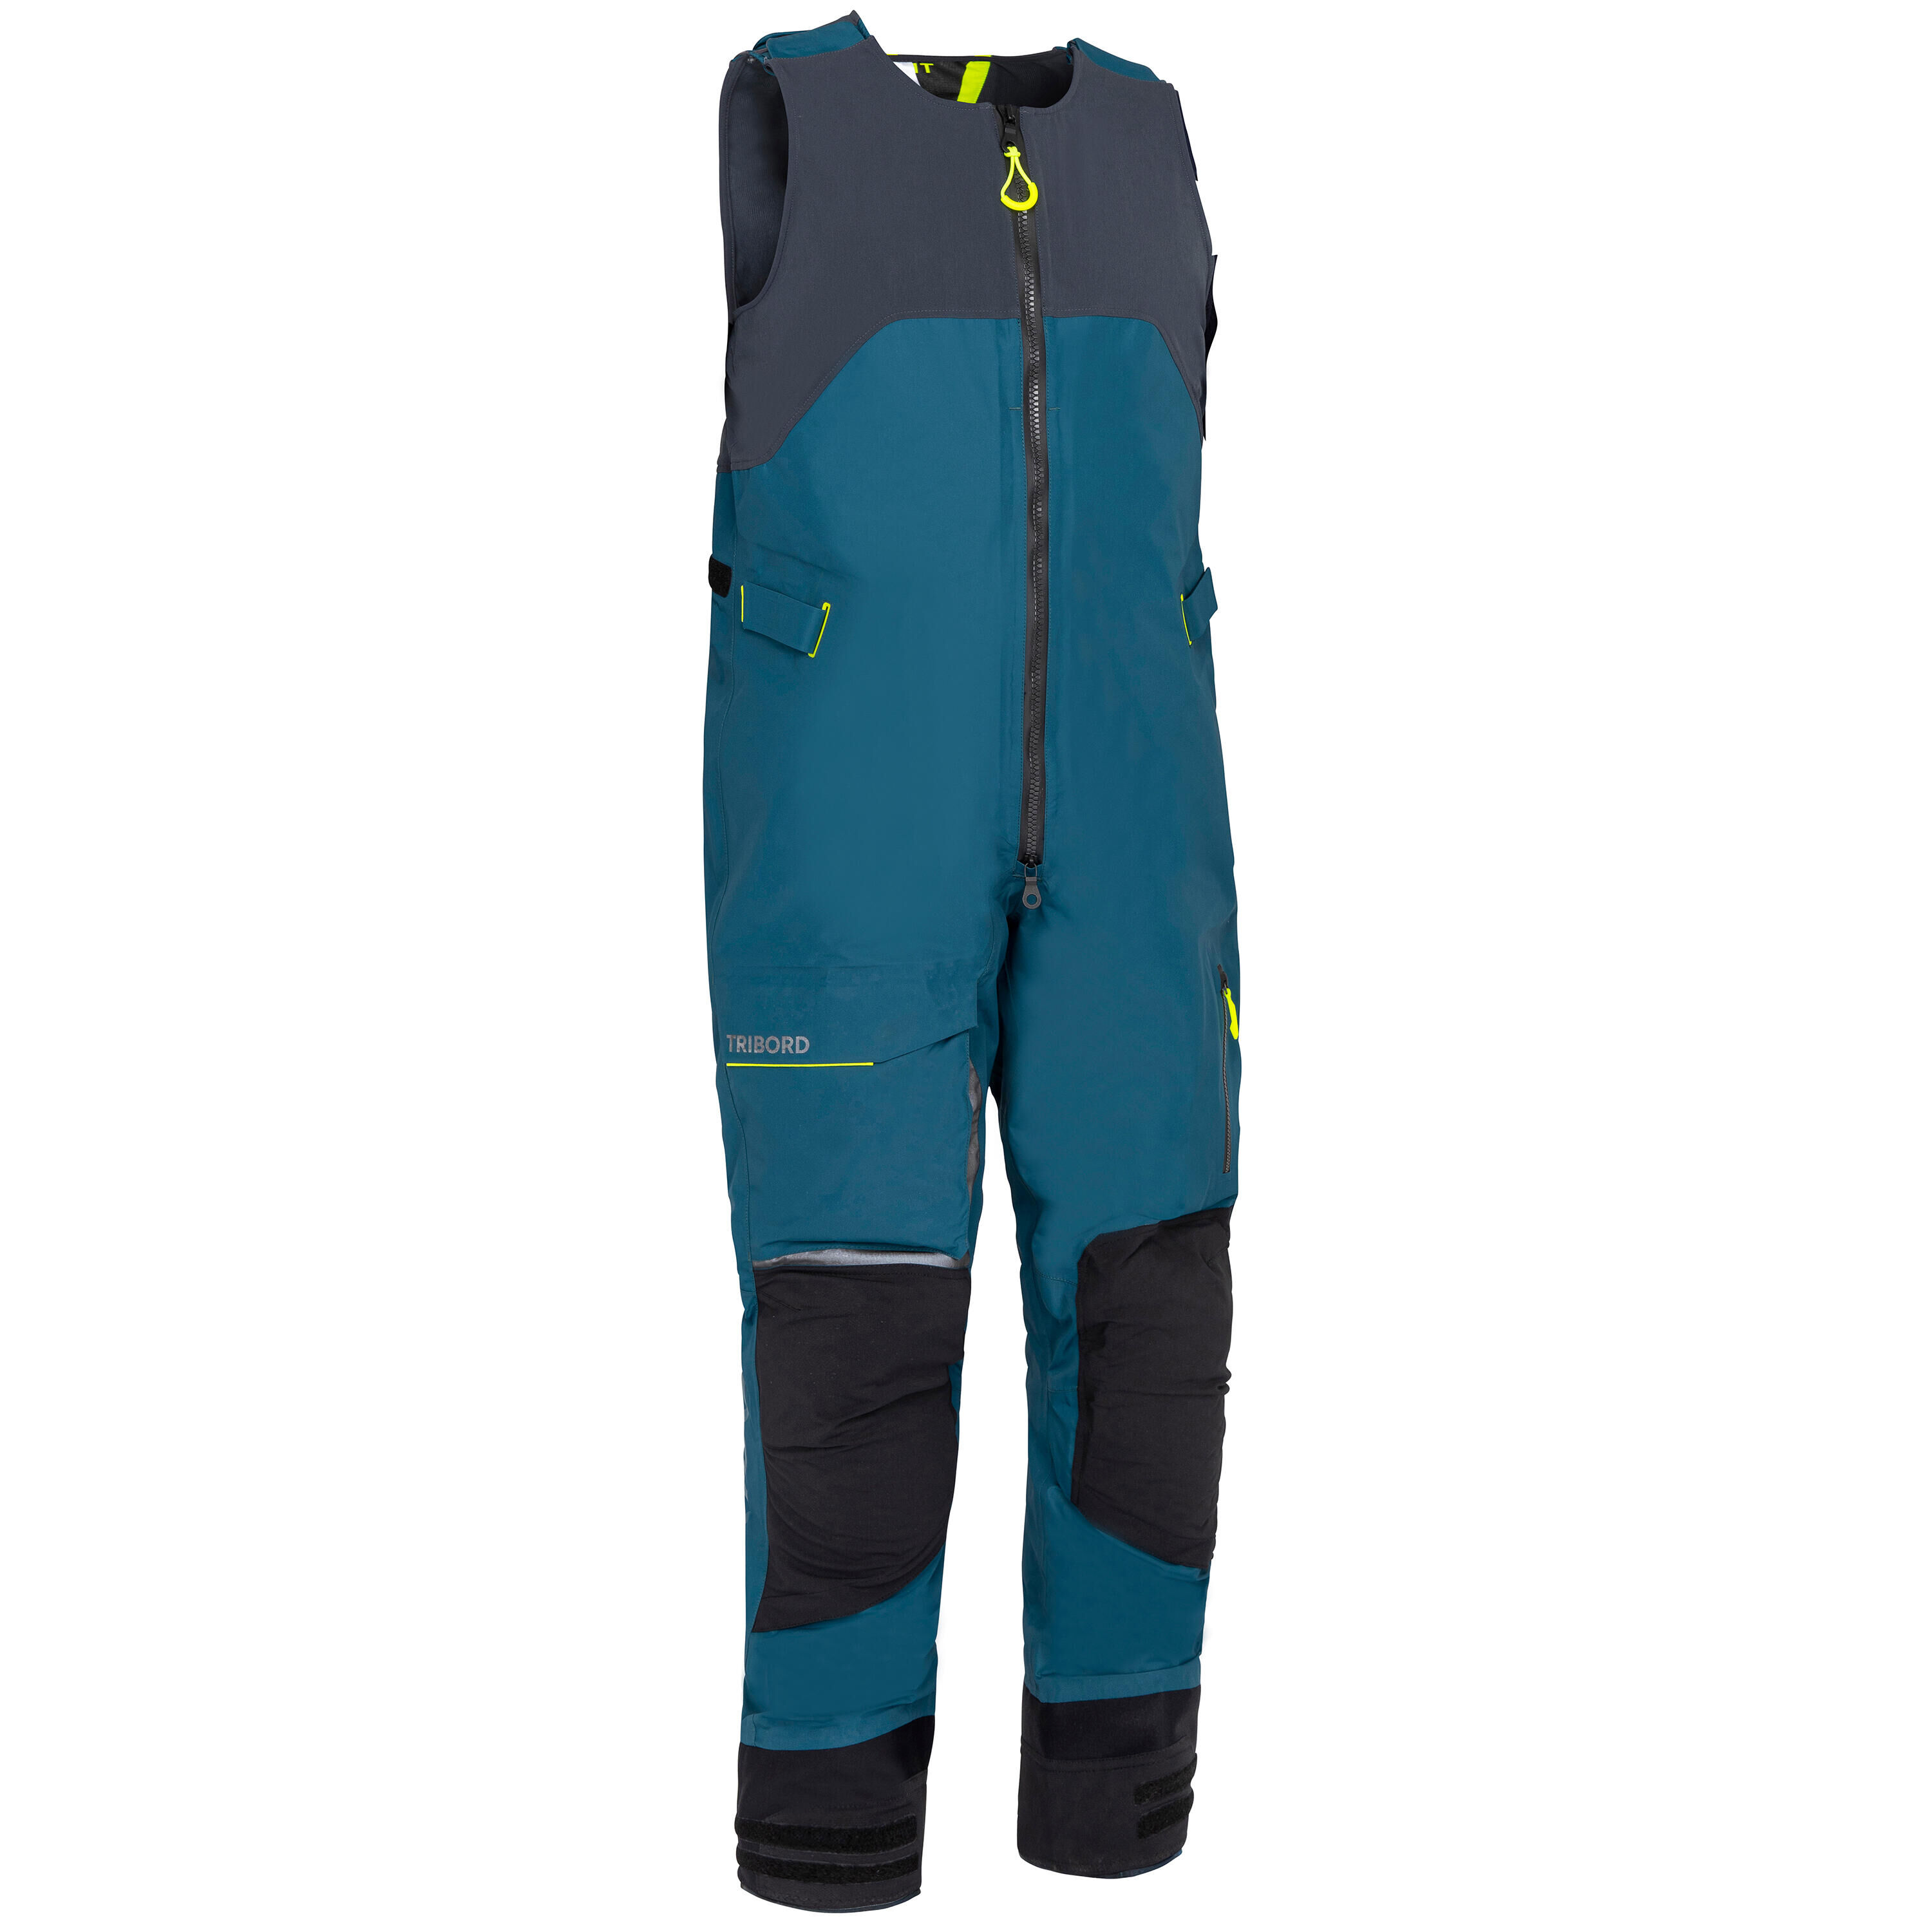 TRIBORD Adult Sailing overalls - Offshore Race 900 Petrol